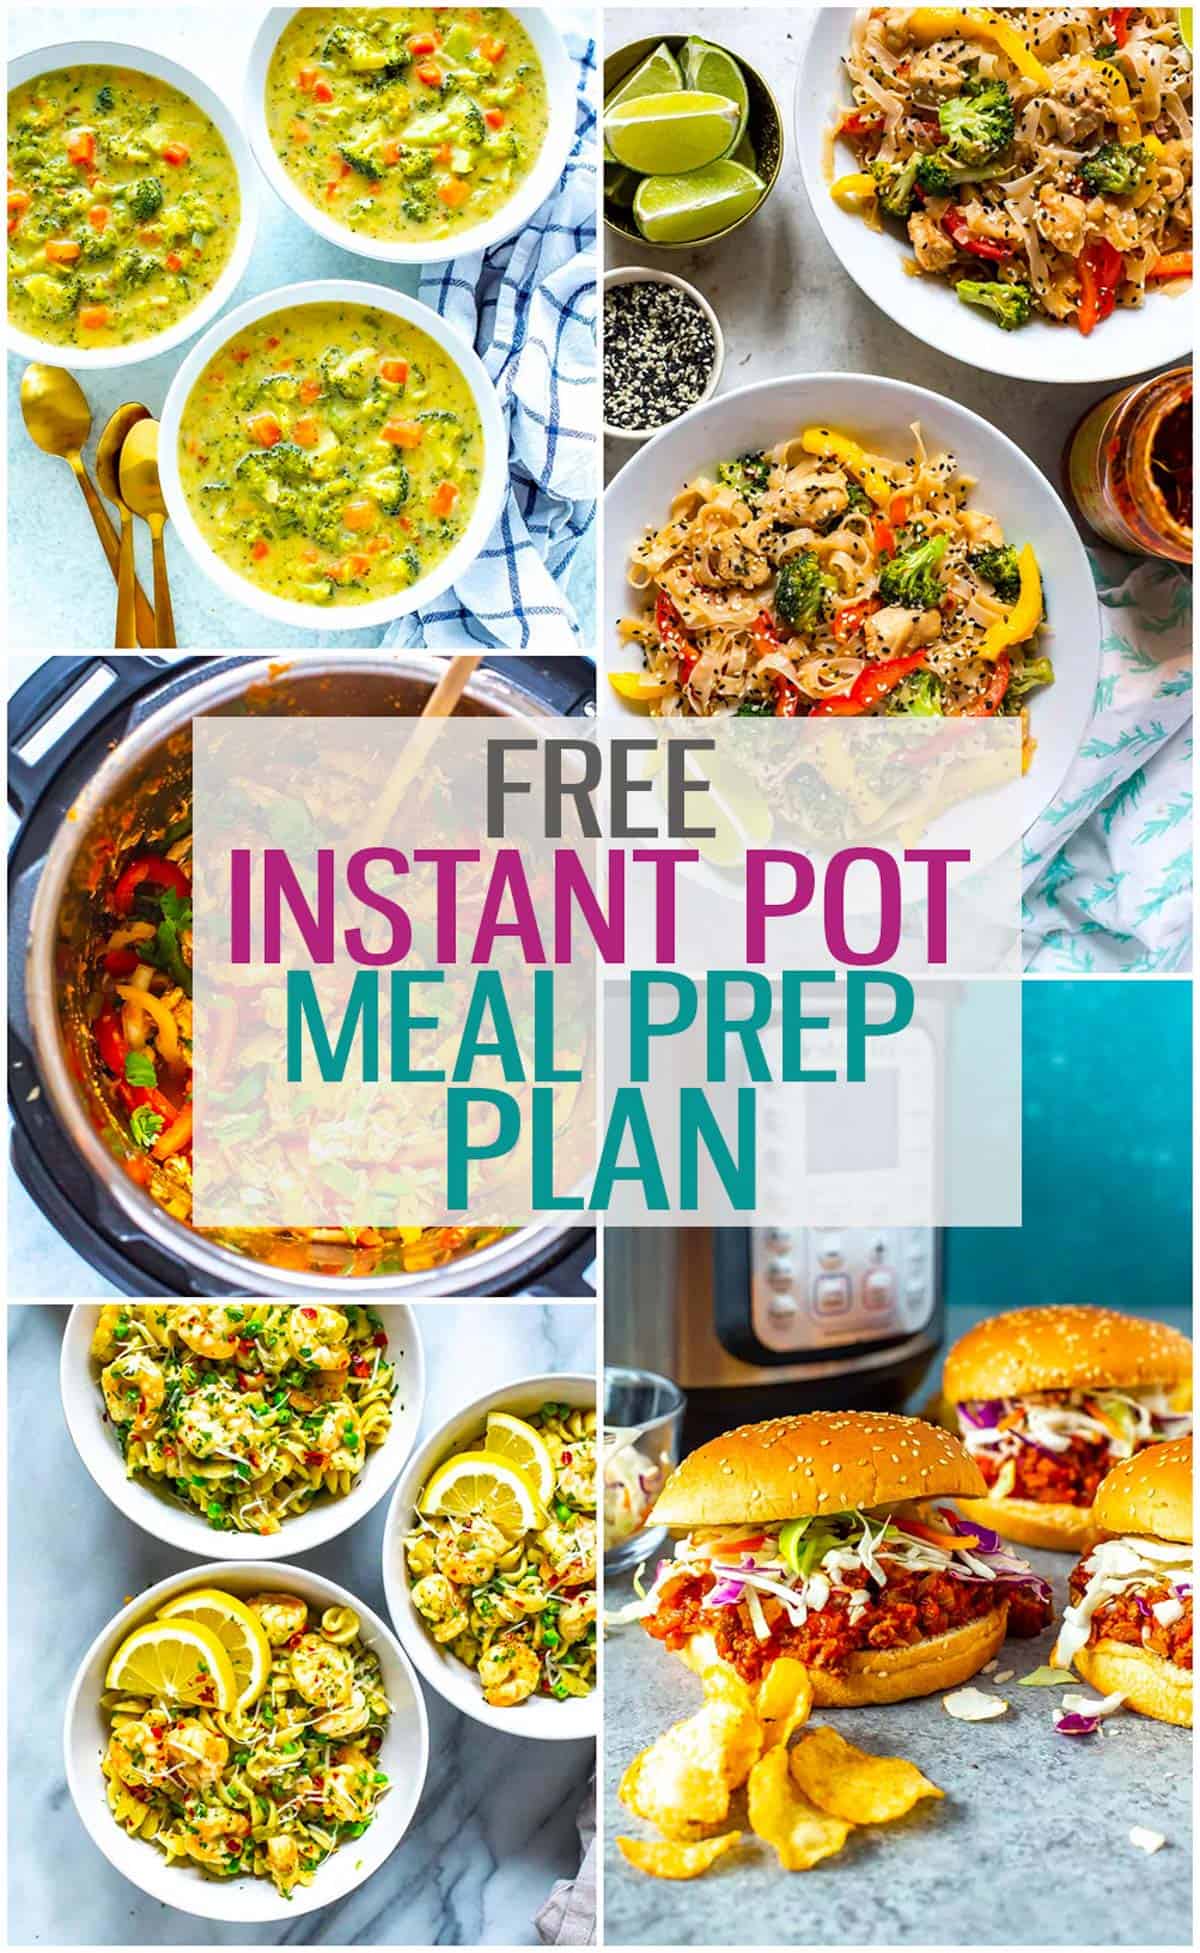 A collage of 5 different Instant Pot recipes with the text "Free Instant Pot Meal Prep Plan" layered over top.